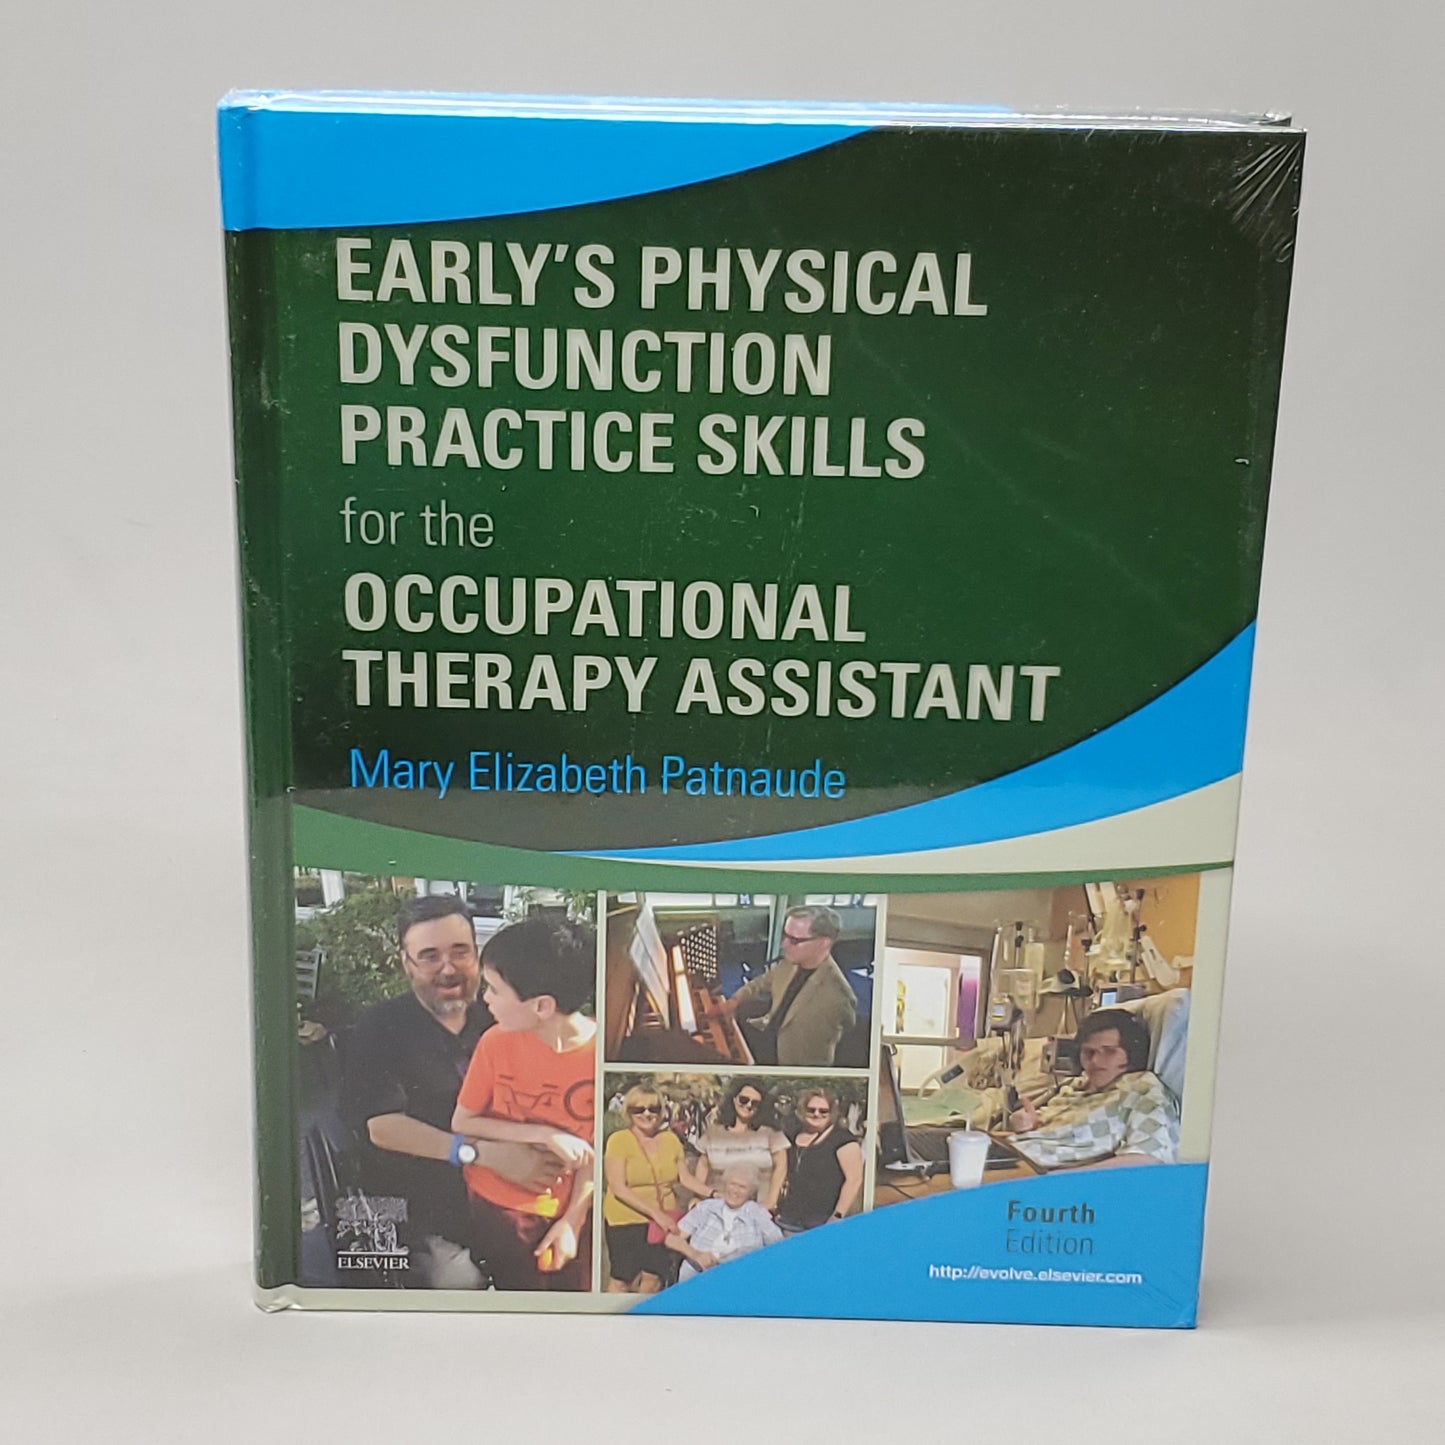 ELSEVIER Occupational Therapy Assistant Textbook Fourth Edition Mary Patnaude (New)